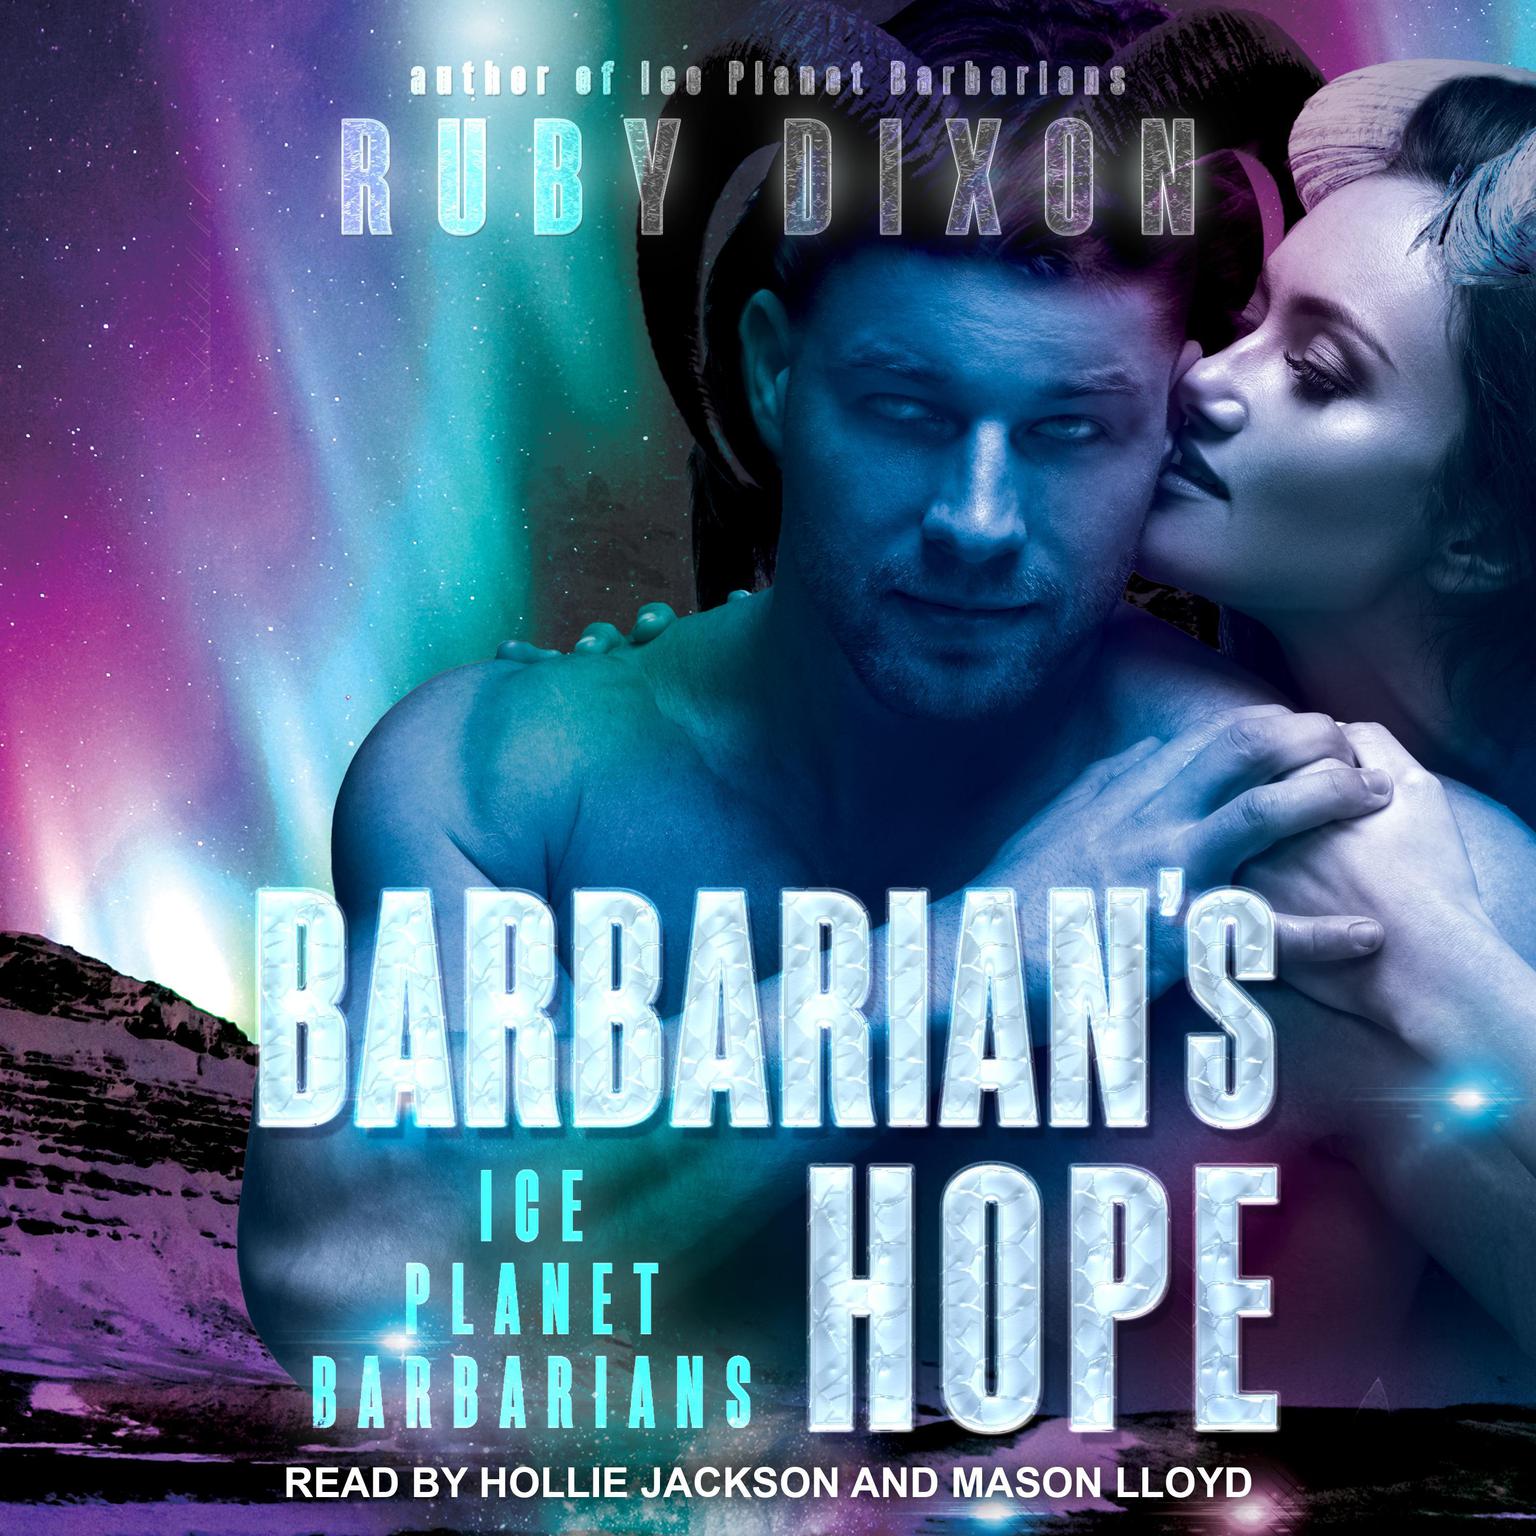 Barbarians Hope: A SciFi Alien Romance (Ice Planet Barbarians) Audiobook, by Ruby Dixon